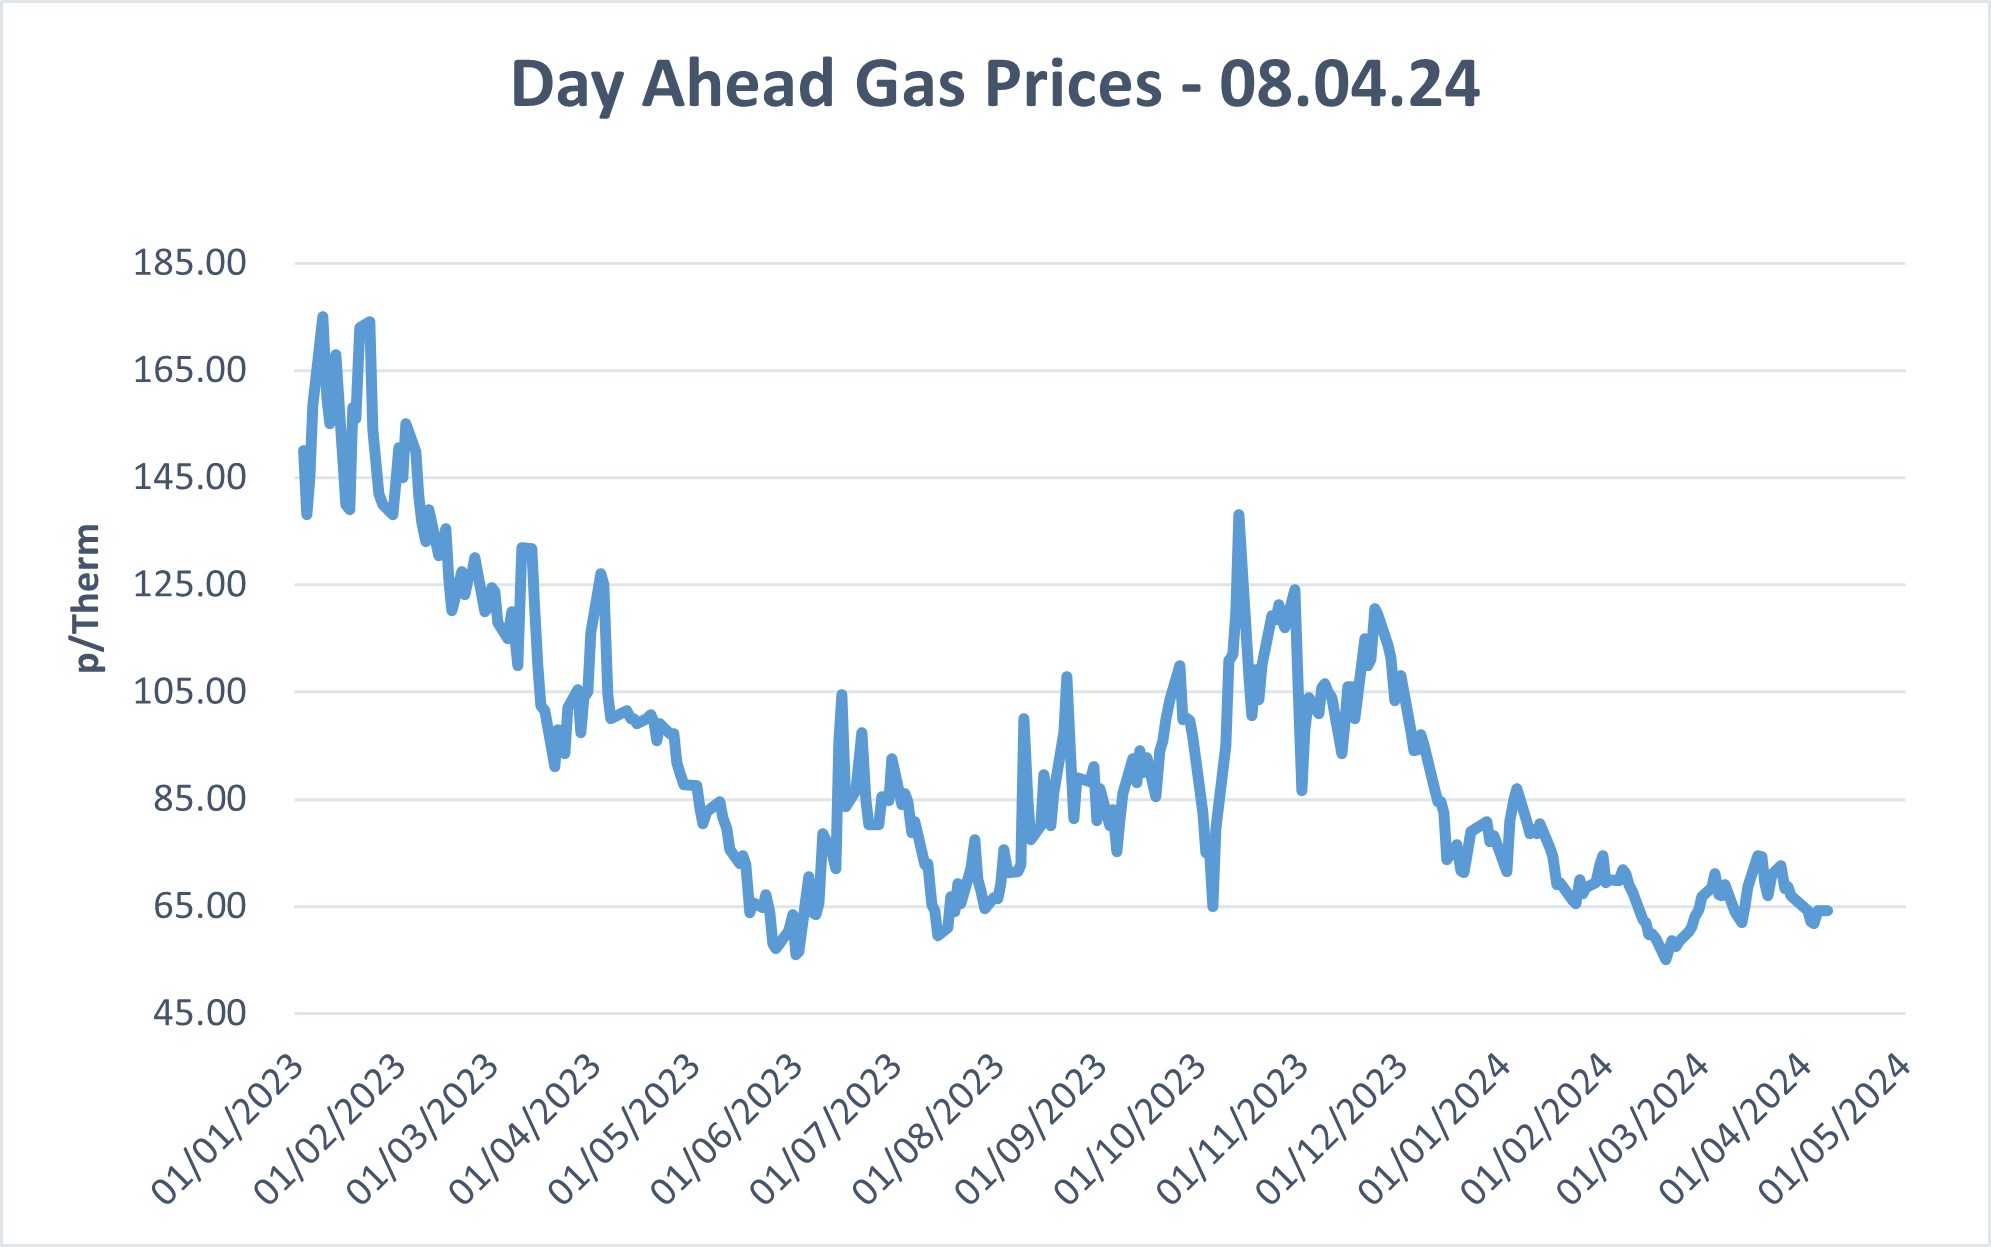 wholesale gas prices day ahead 08.04.24